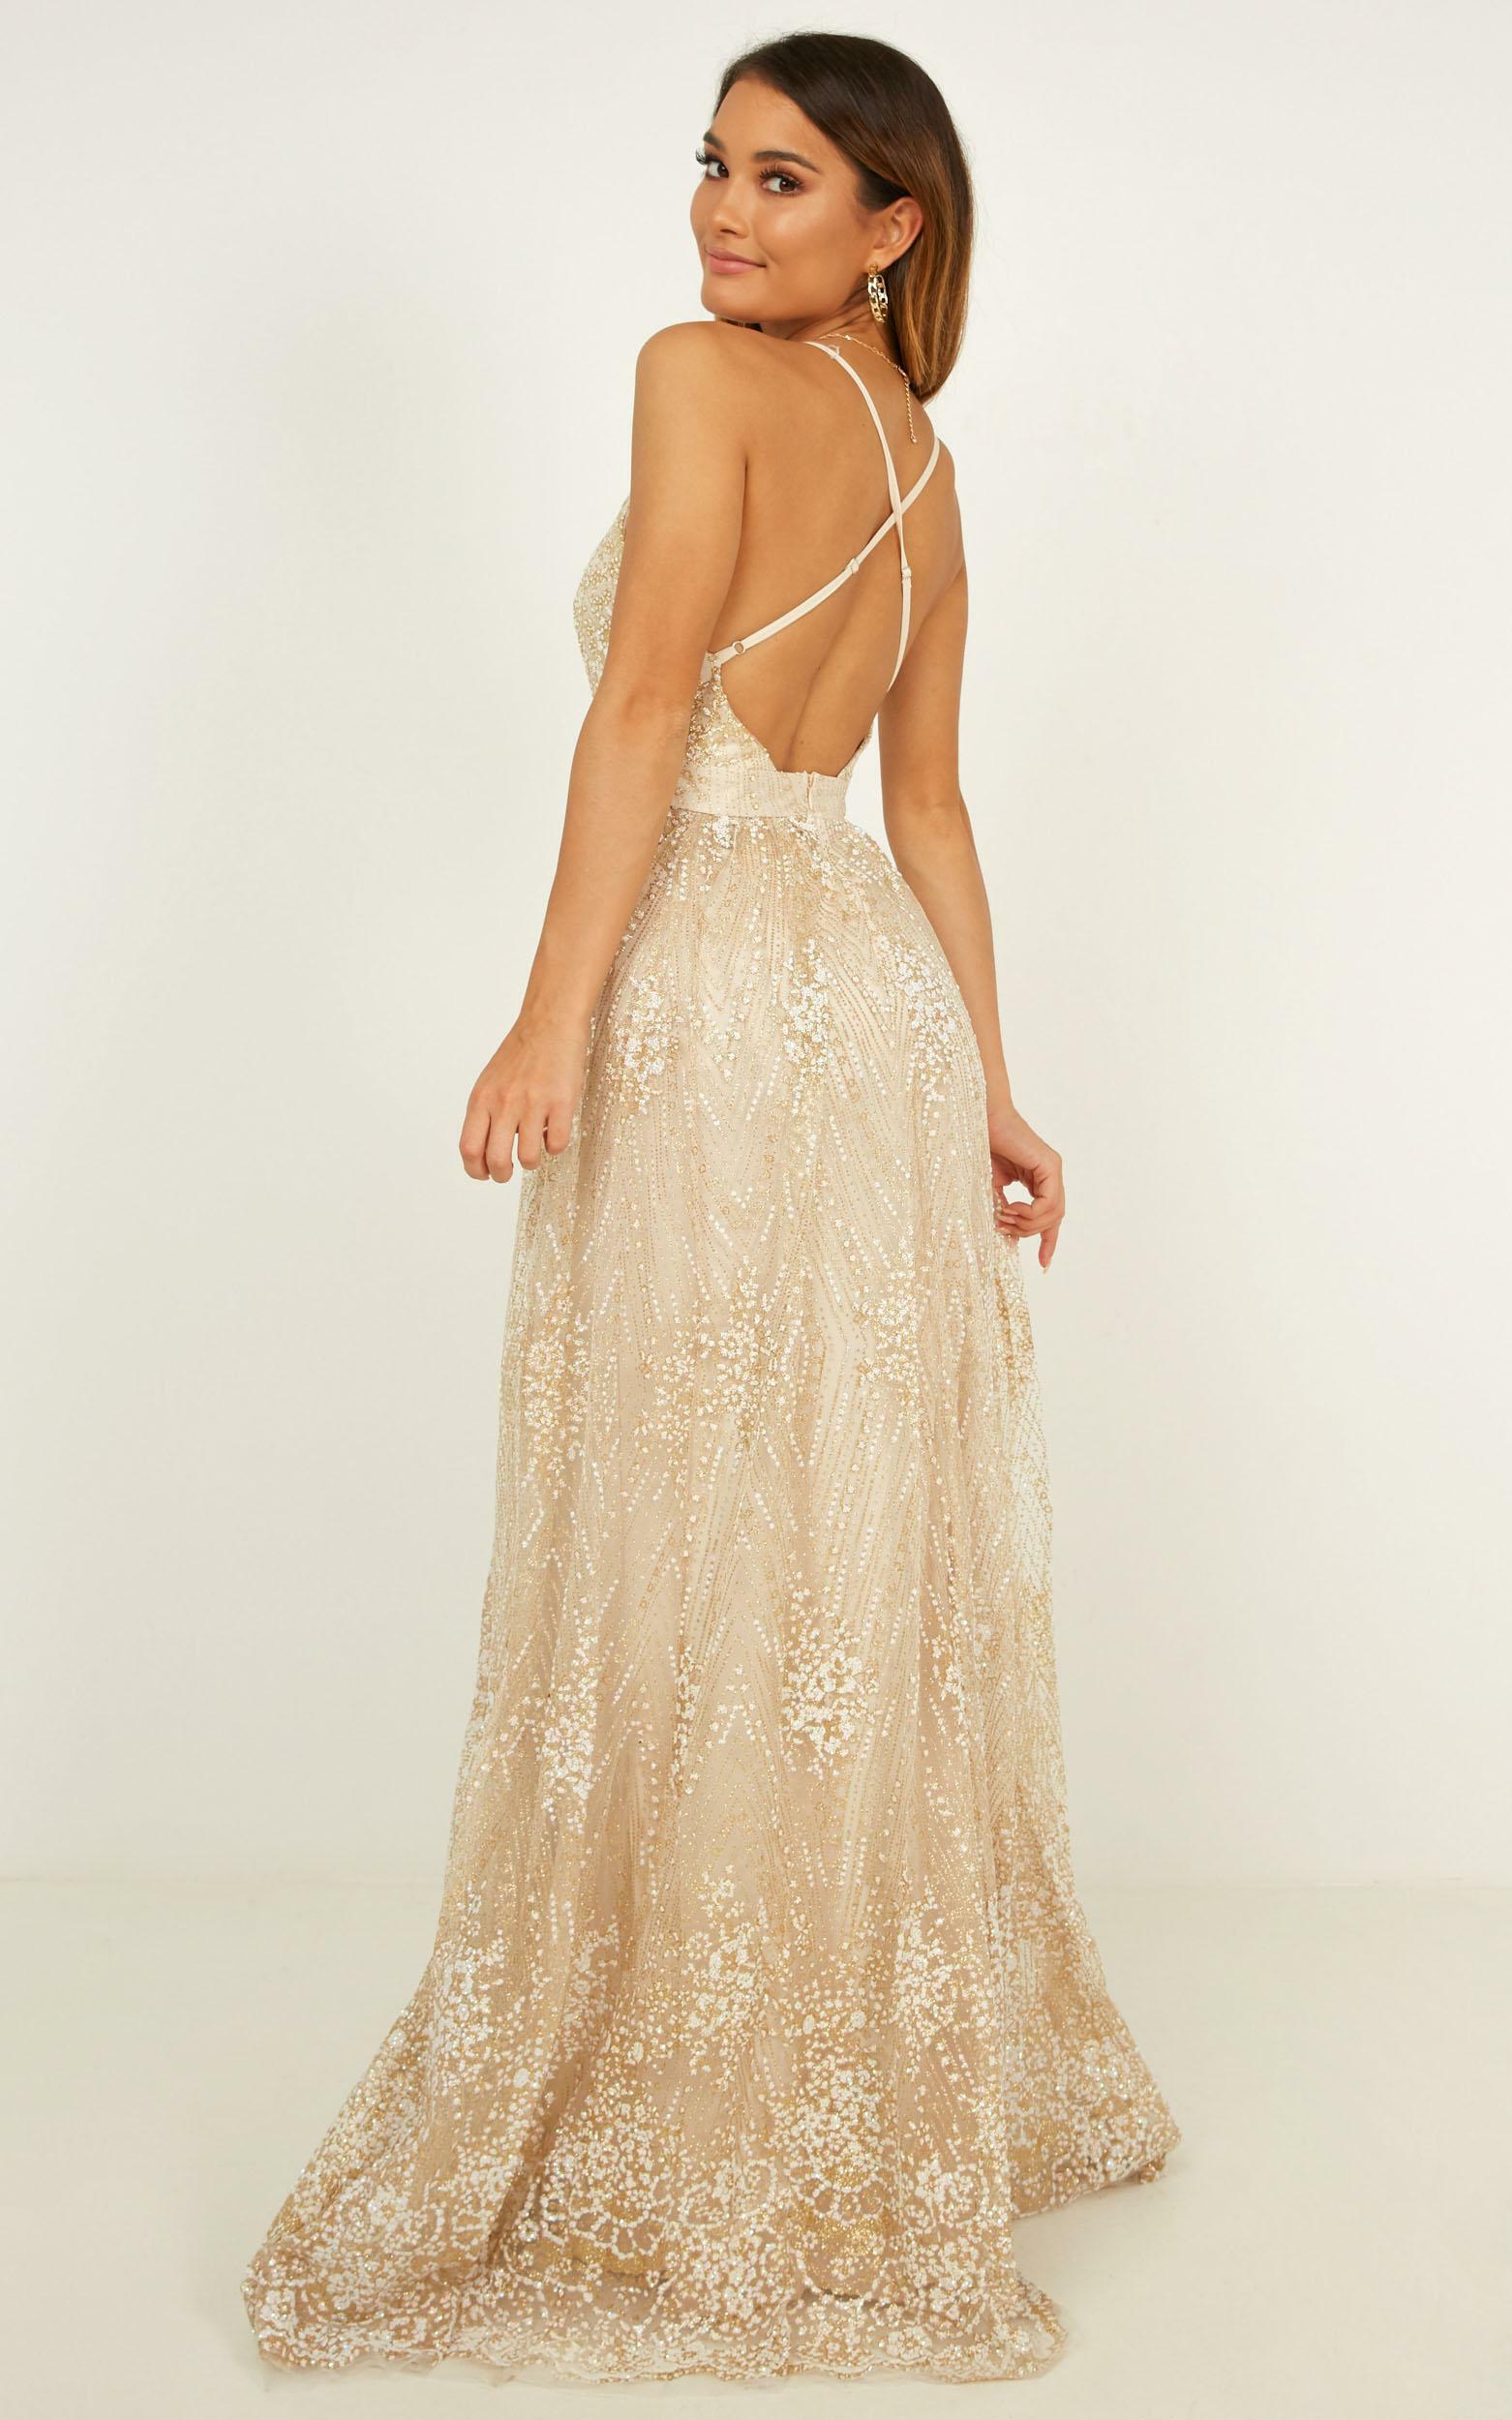 Her Crystal Eyes Maxi Dress in Gold Glitter Tulle - 12, GLD1, hi-res image number null